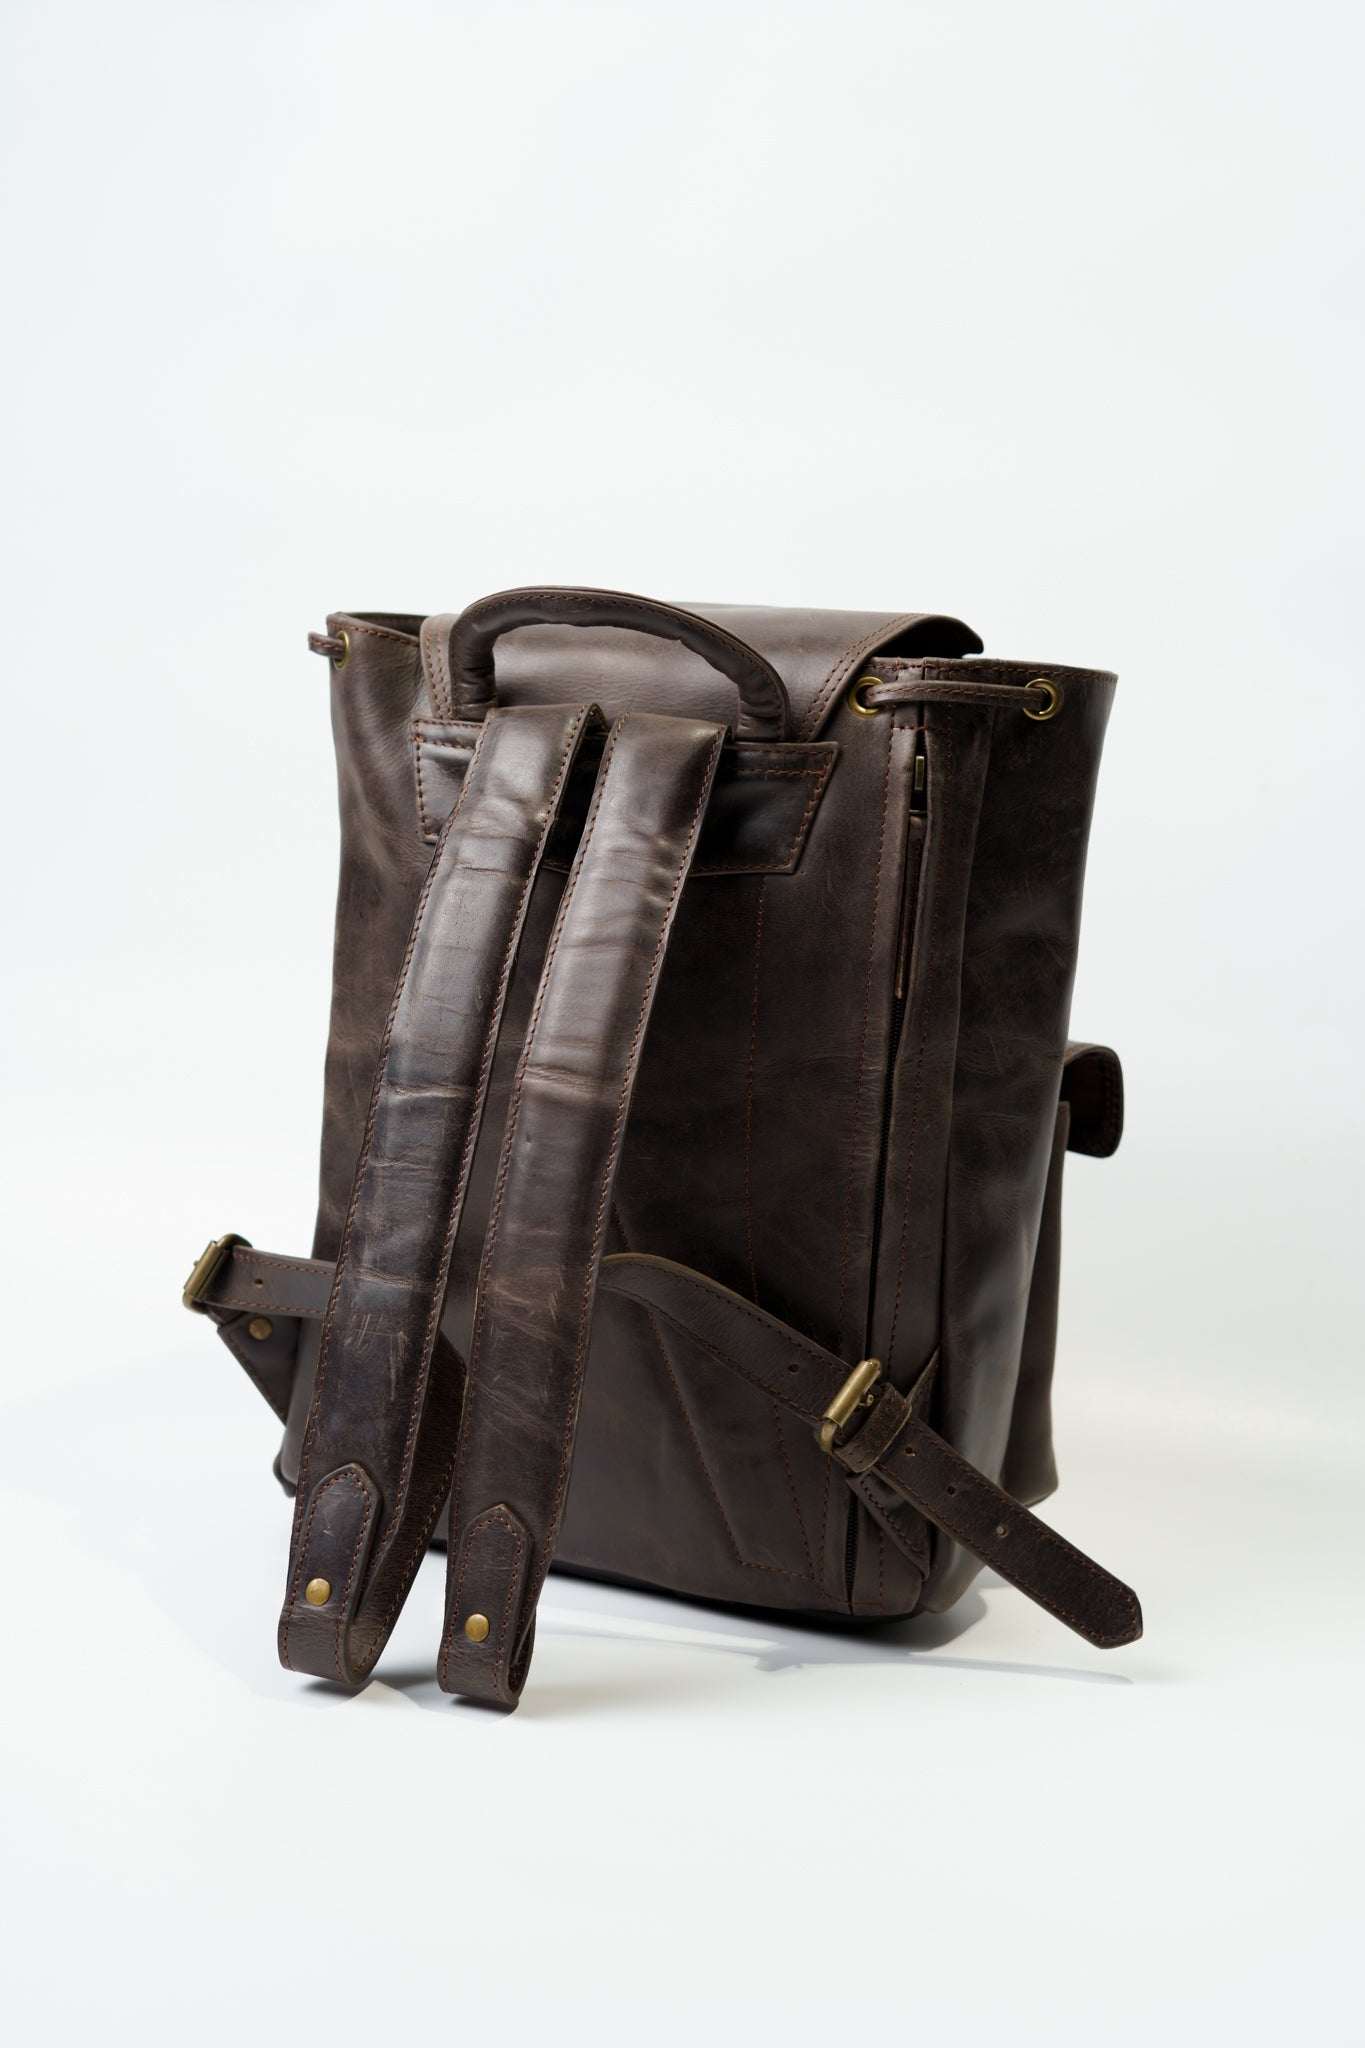 Rear view of Chamra's dark brown leather utility backpack showcasing adjustable shoulder straps and a hand-carry strap.